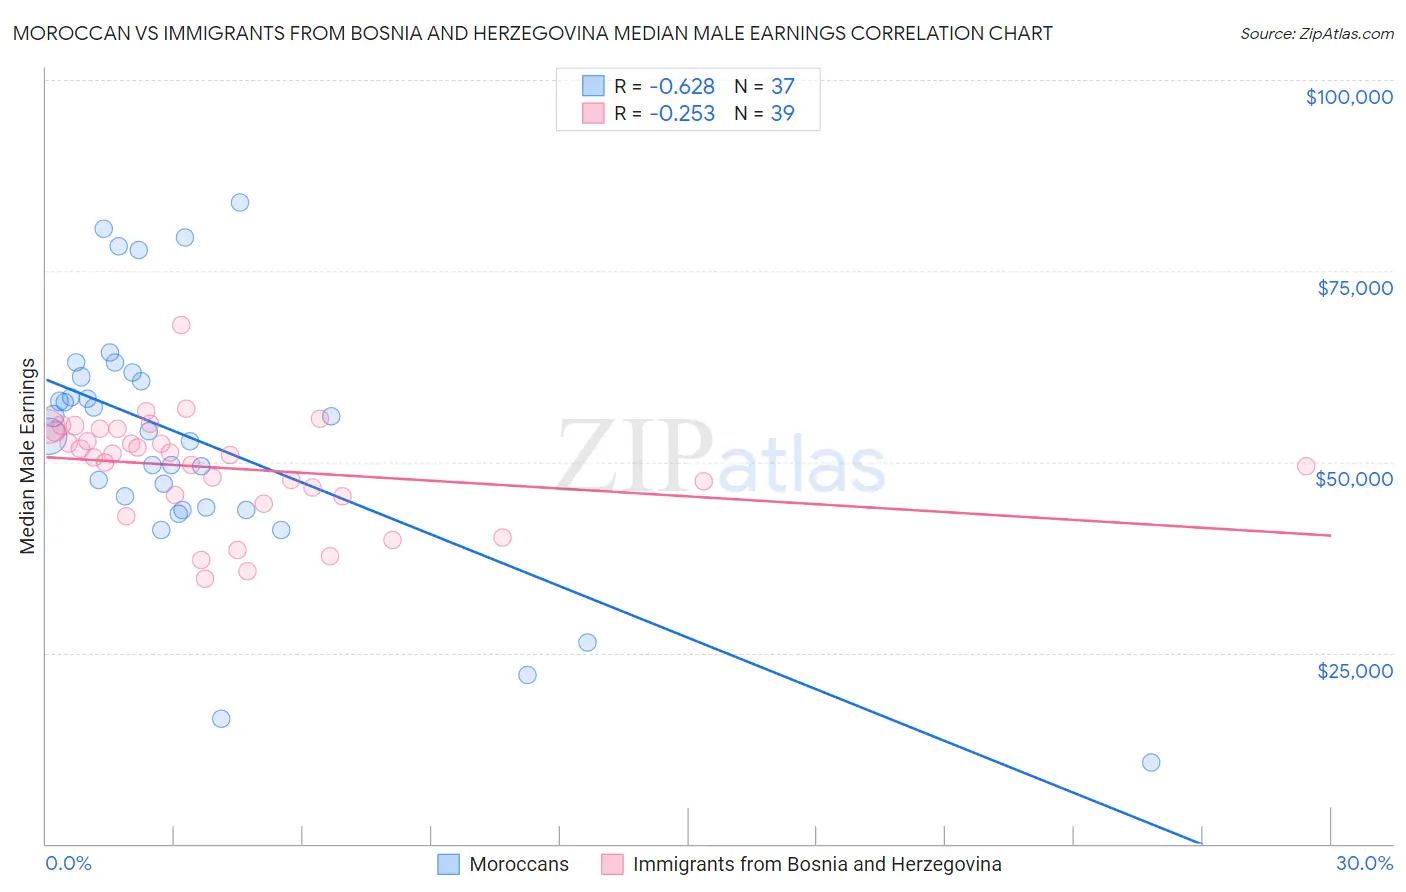 Moroccan vs Immigrants from Bosnia and Herzegovina Median Male Earnings